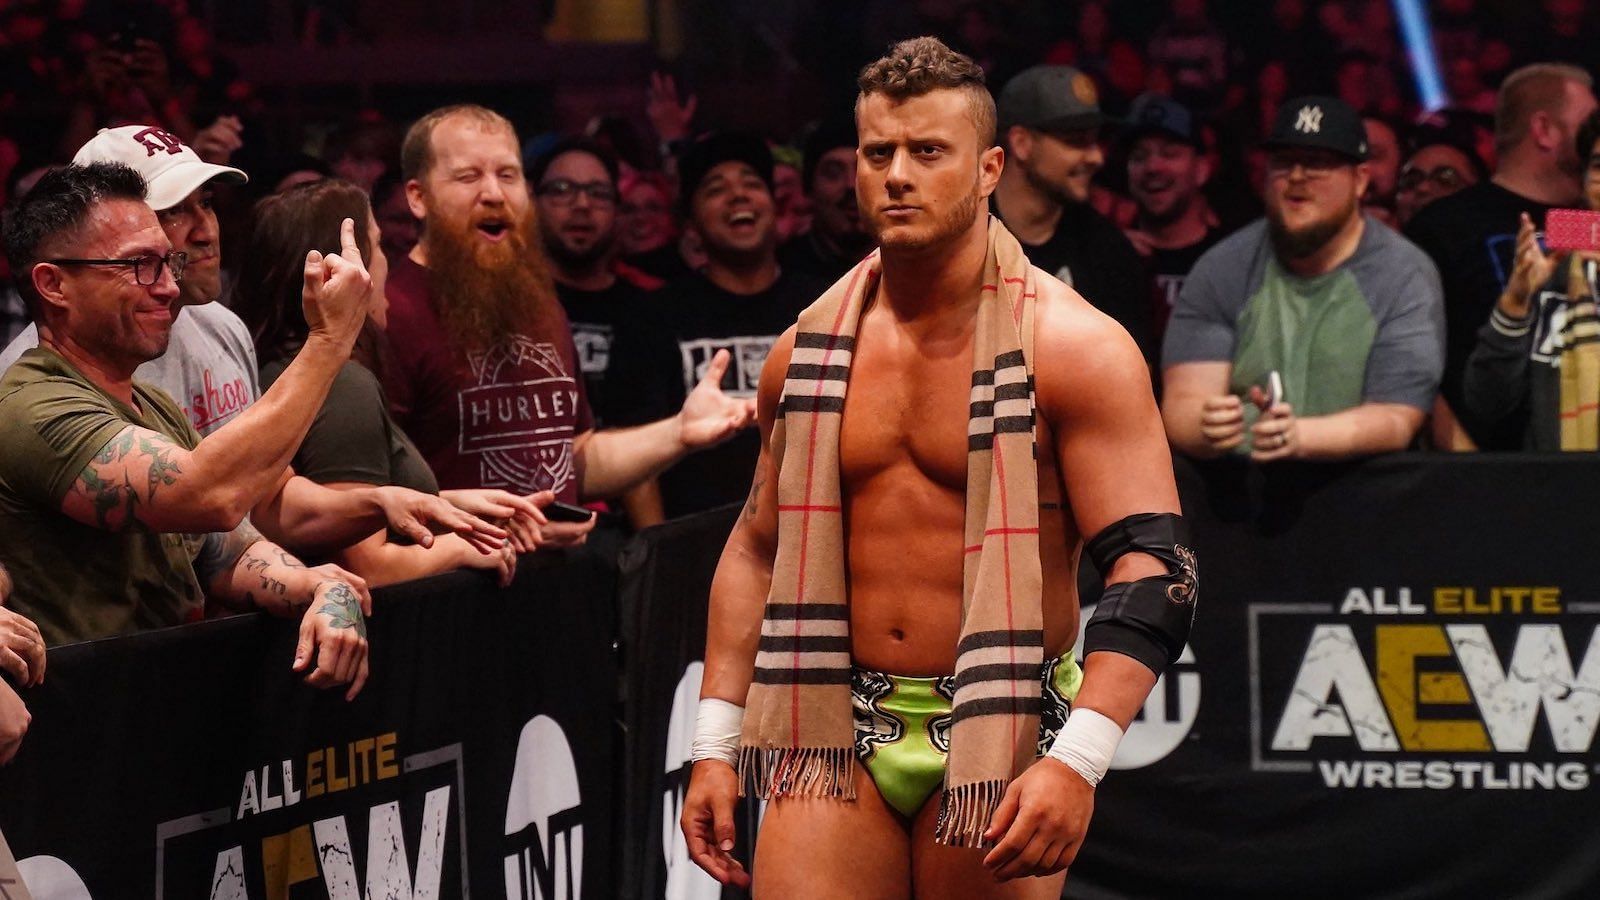 MJF might be heading towards another feud soon